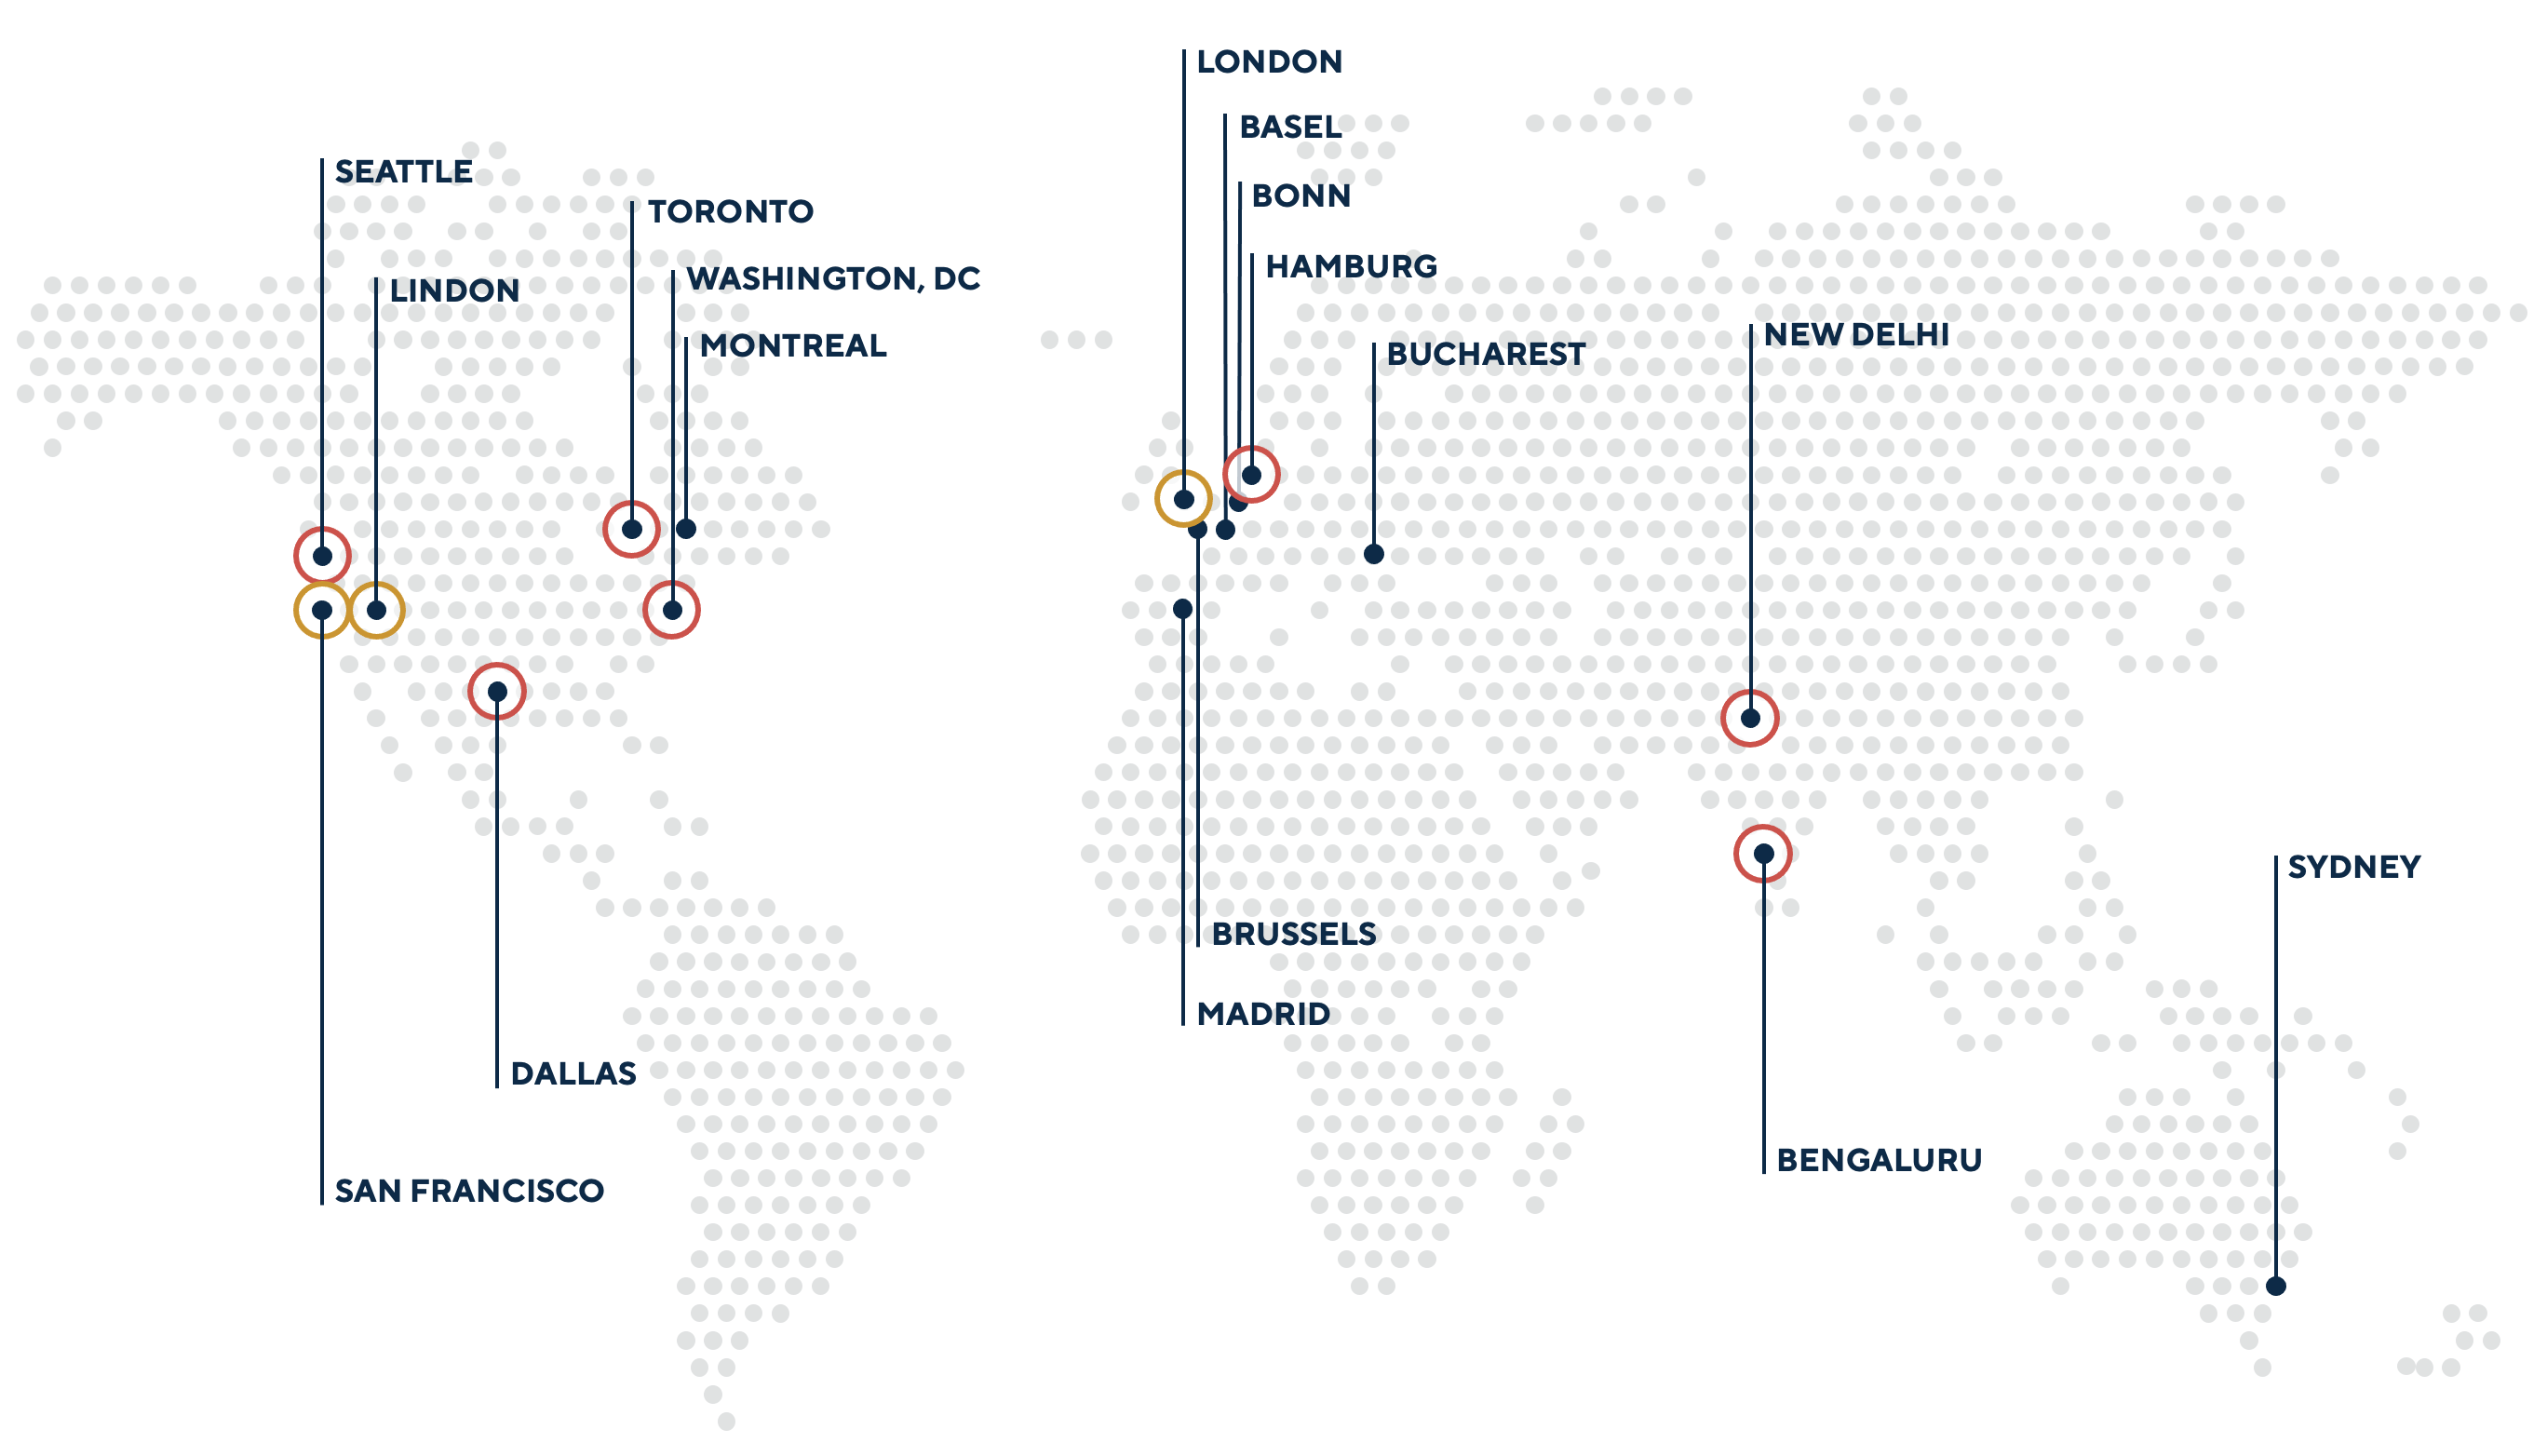 Anglepoint's offices around the world, with our main offices in San Francisco, Lindon, and London.